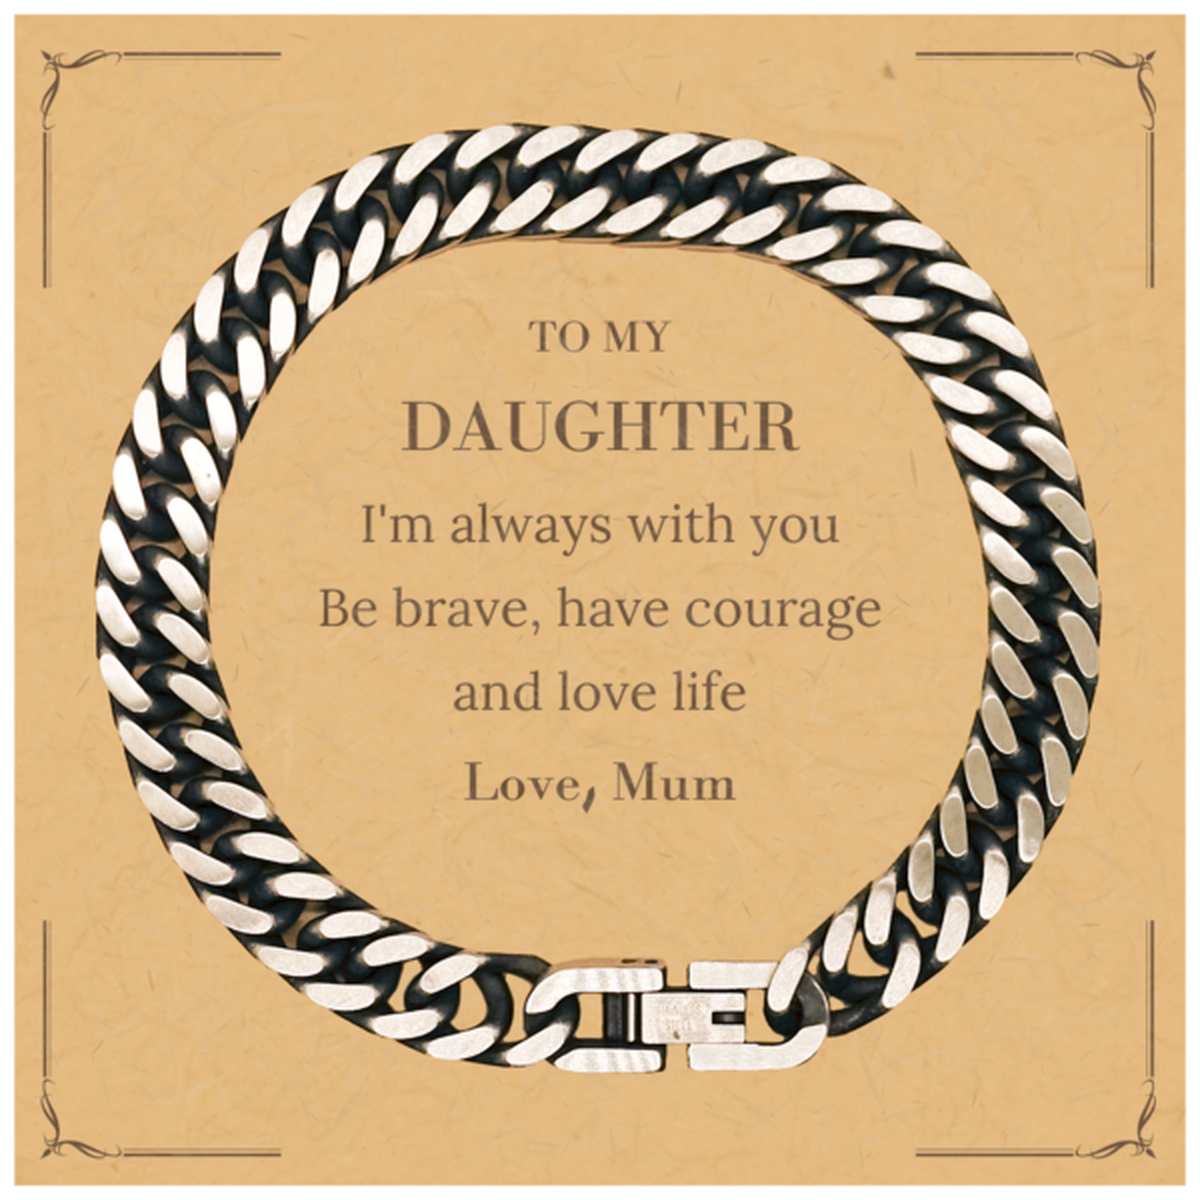 To My Daughter Gifts from Mum, Unique Cuban Link Chain Bracelet Inspirational Christmas Birthday Graduation Gifts for Daughter I'm always with you. Be brave, have courage and love life. Love, Mum